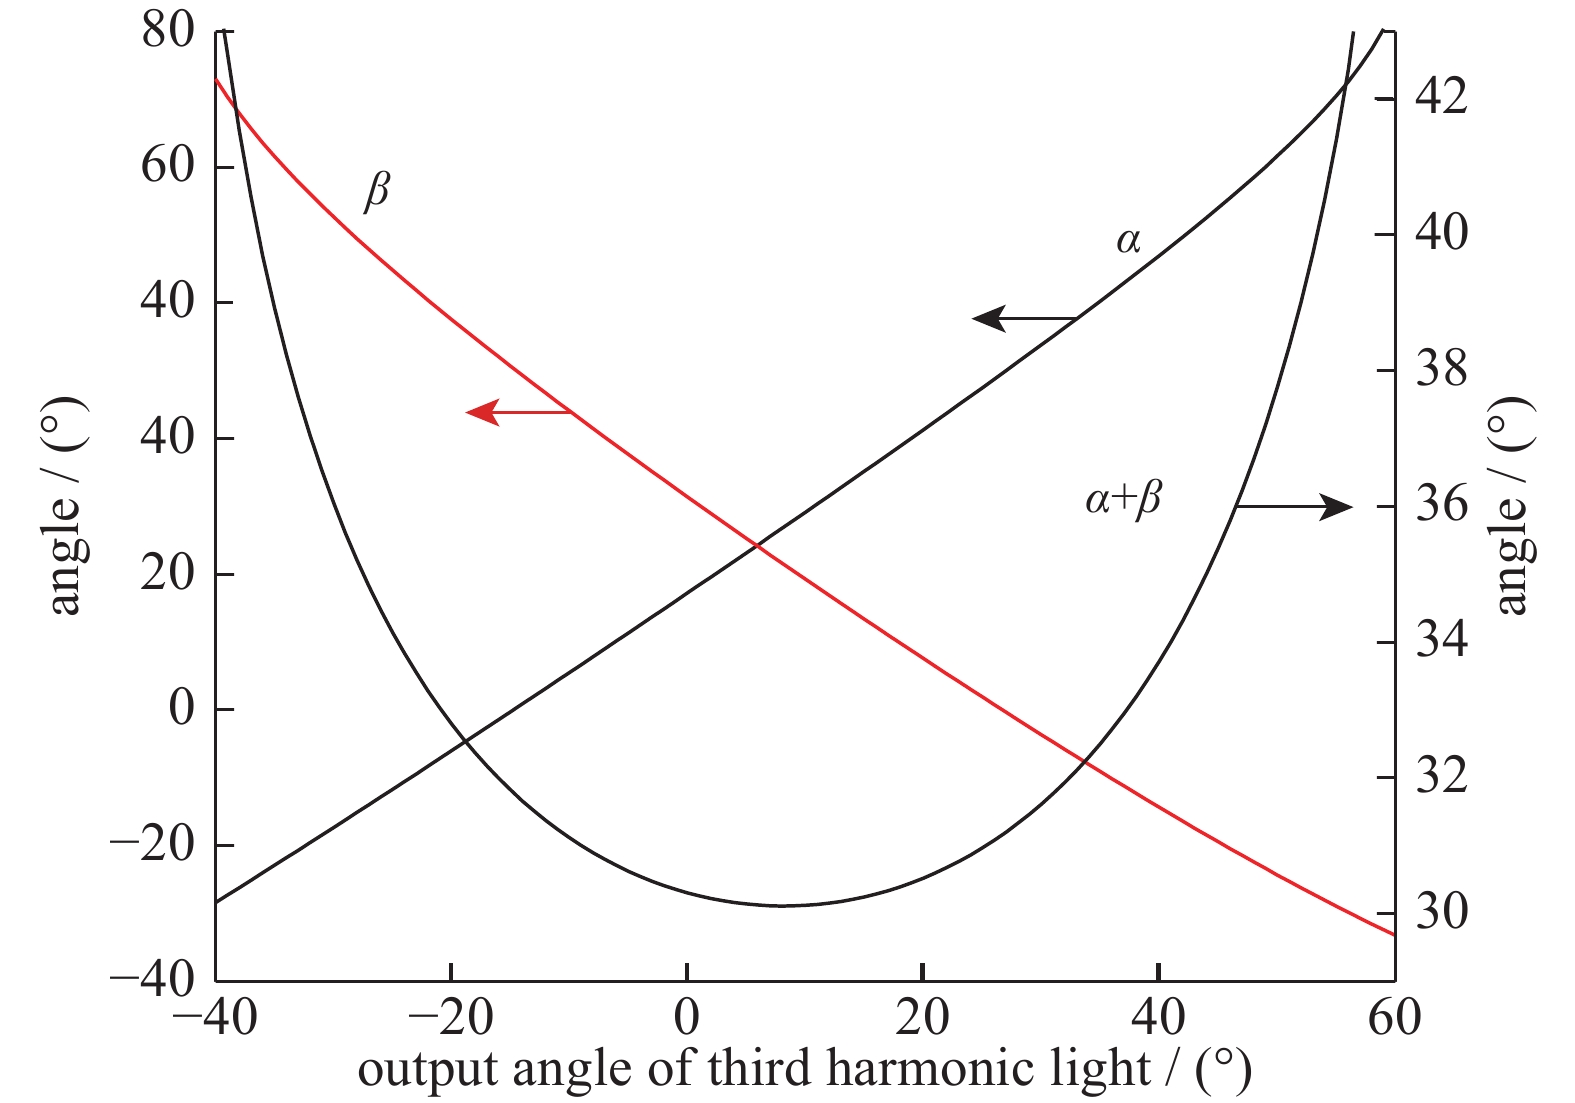 Angle relation between the output third harmonic light and the incident light